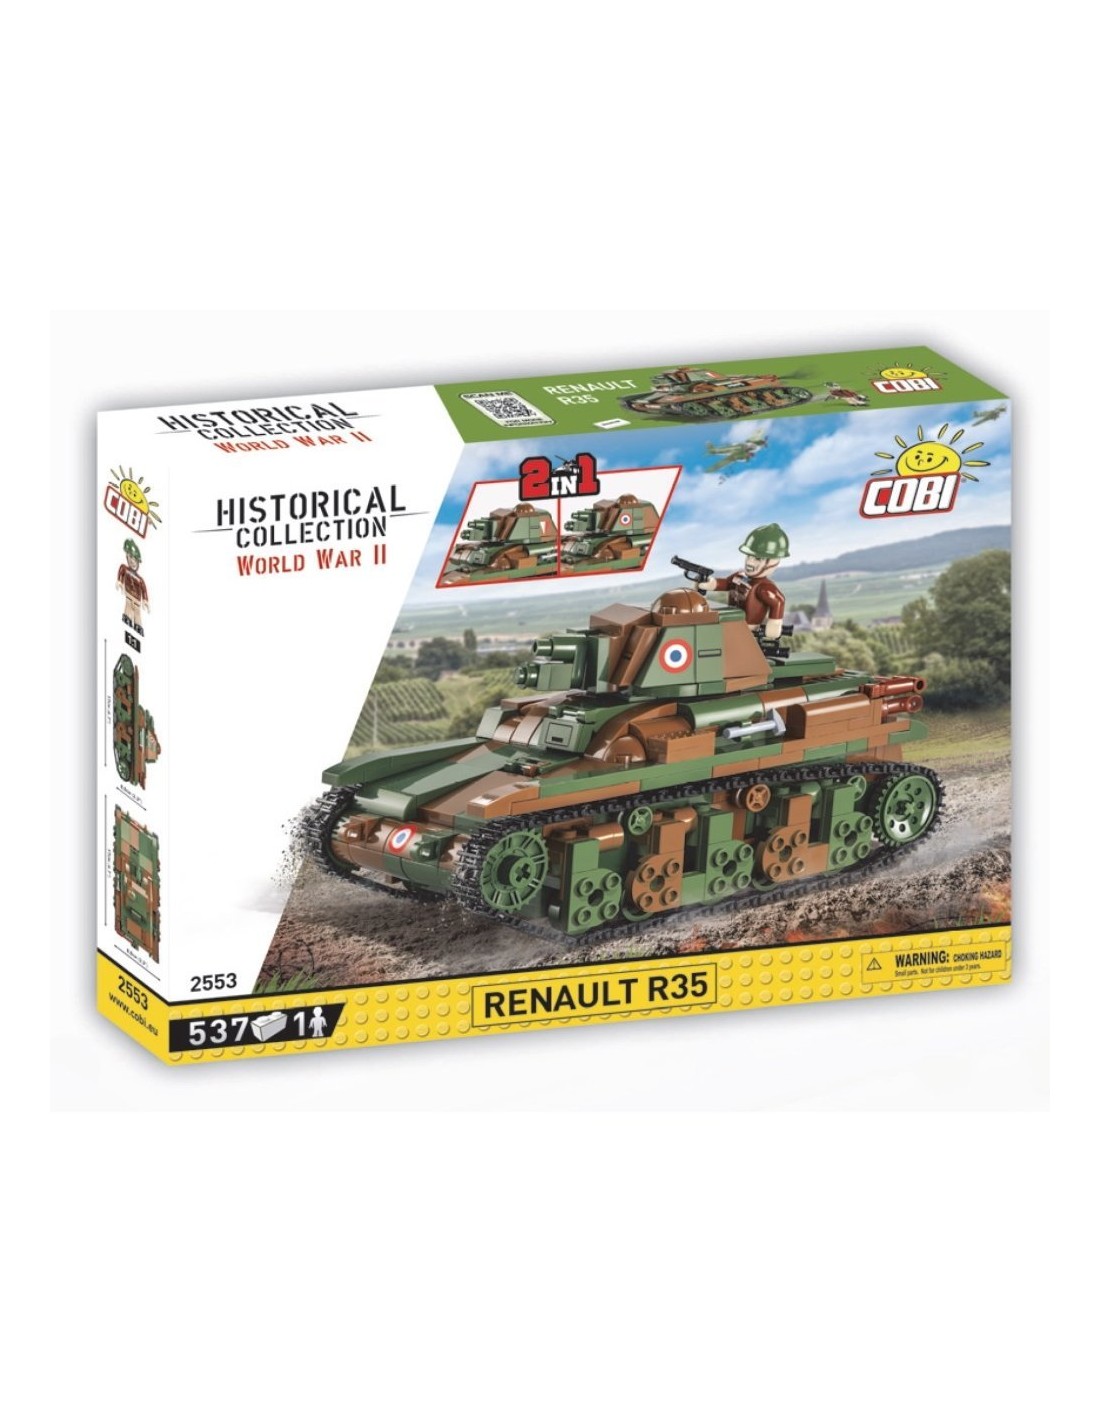 540 Pcs Historical Collection WWII /2553/ Renault